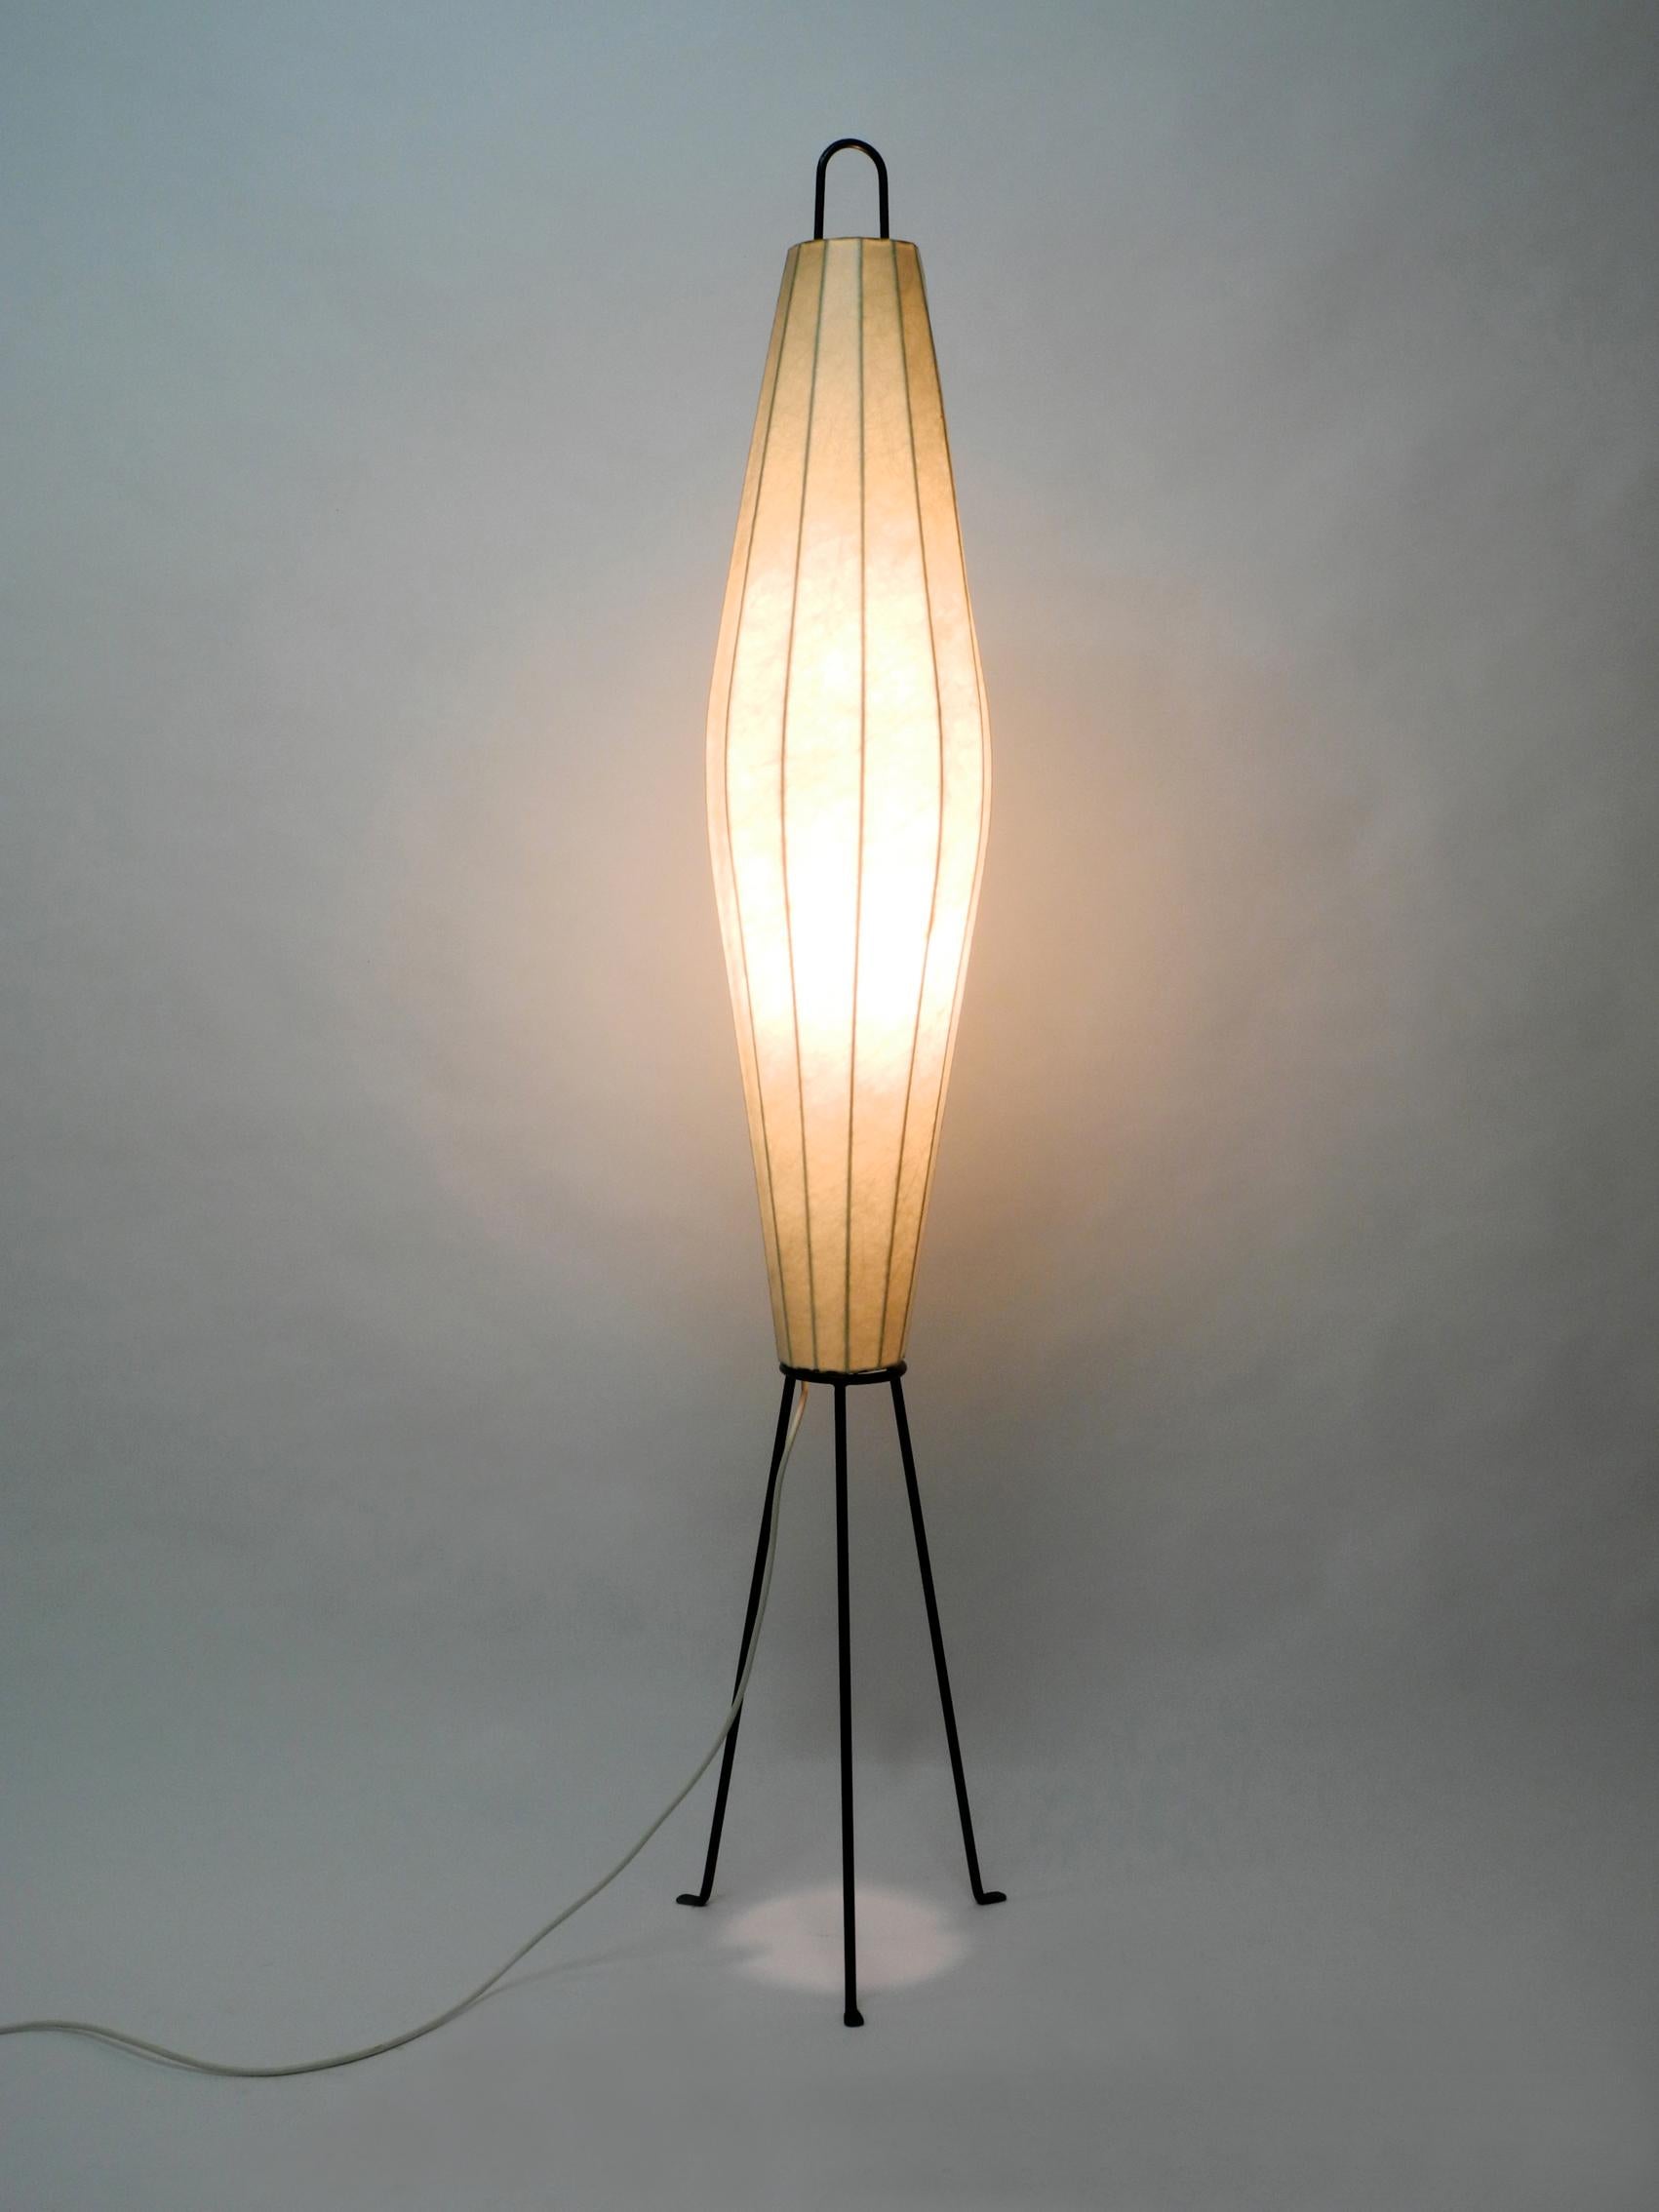 Very rare and huge Mid-Century Modern tripod Cocoon floor lamp. A extra large height of 163 cm. Great minimalistic 1950s design. Very rare in this size. Produces a very pleasant warm light. Very good original vintage condition. The cocoon shade has